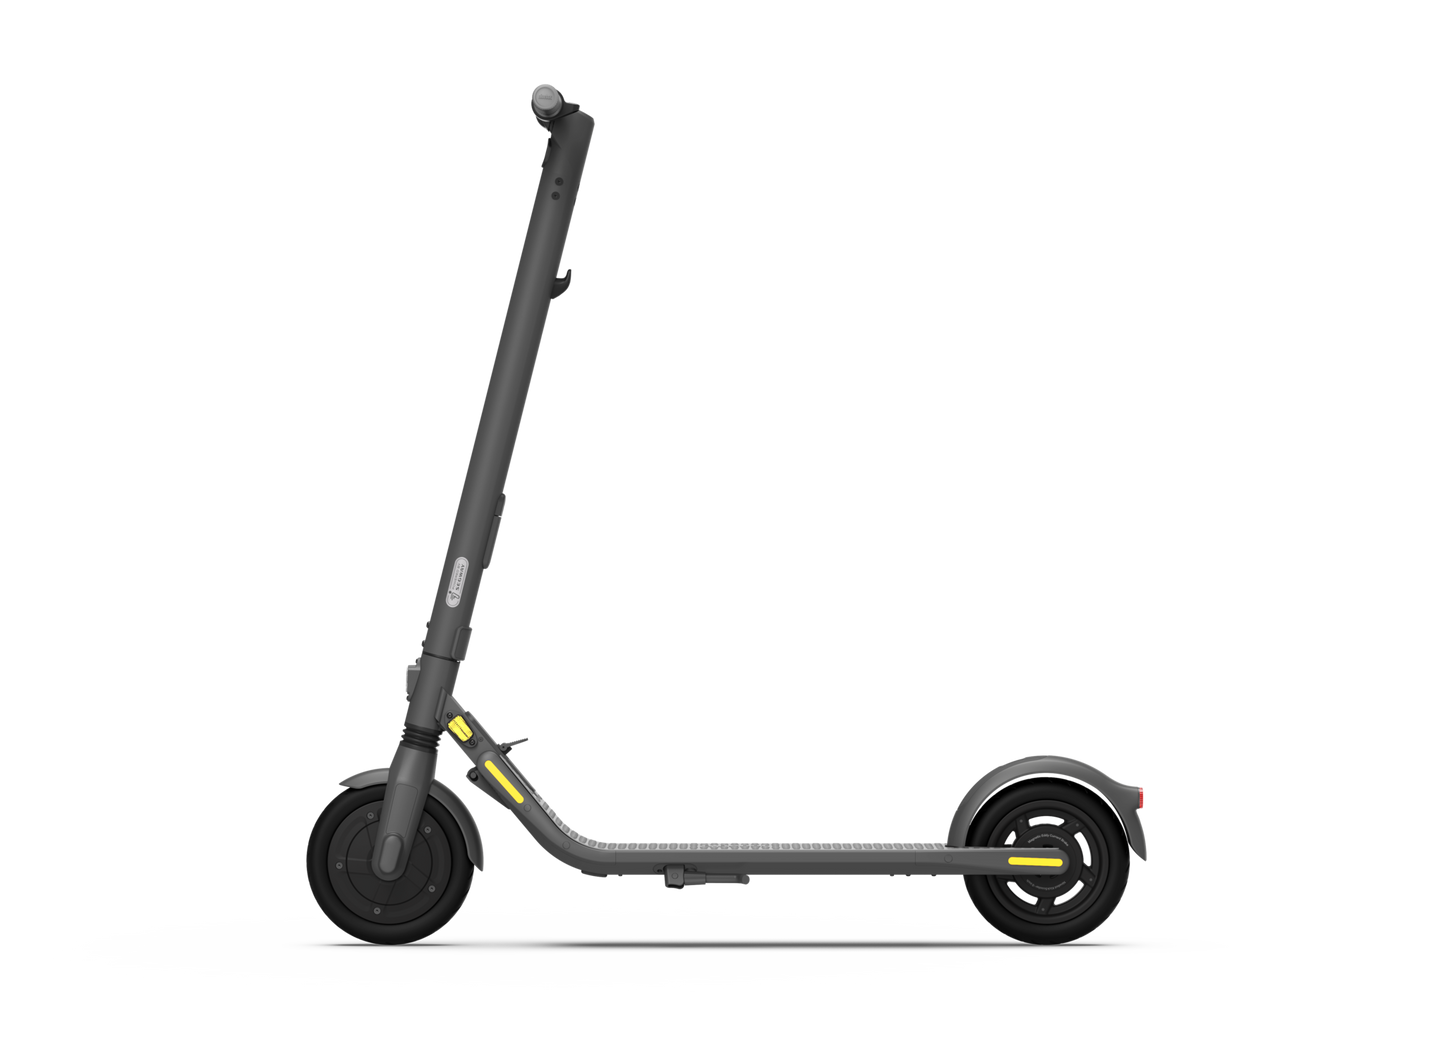 Ninebot E25A Kick-Scooter by Segway - Certified Pre-Owned